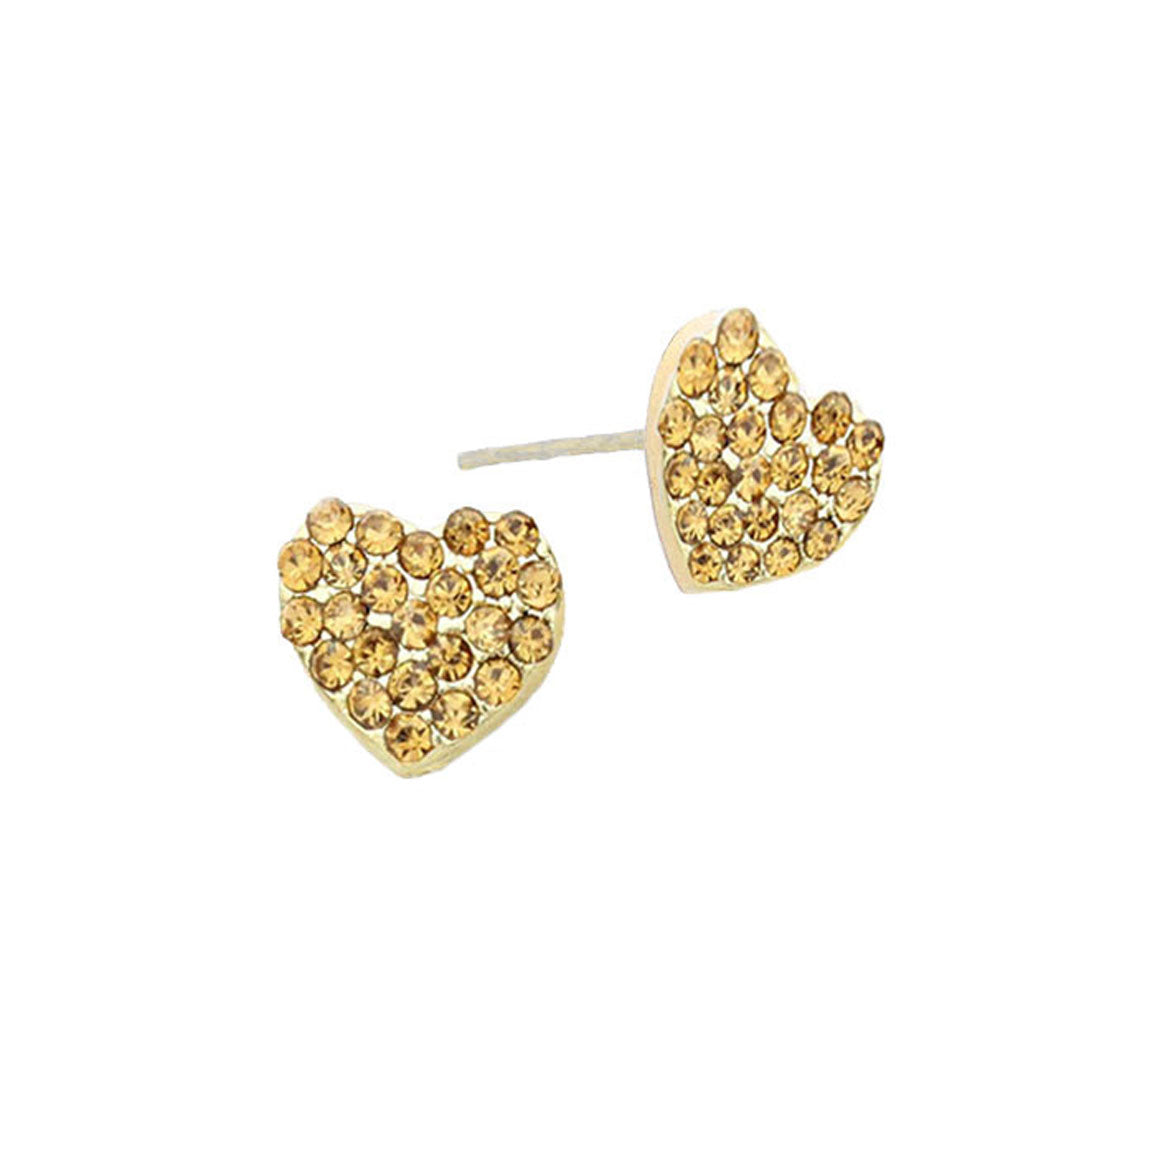 Light Col Topaz Crystal Rhinestone Pave Heart Stud Earrings, put on a pop of color to complete your ensemble. Beautifully crafted design adds a gorgeous glow to any outfit. Perfect for adding just the right amount of shimmer & shine. Perfect for Birthday Gift, Anniversary Gift, Mother's Day Gift, Graduation Gift, Valentine's Day Gift.